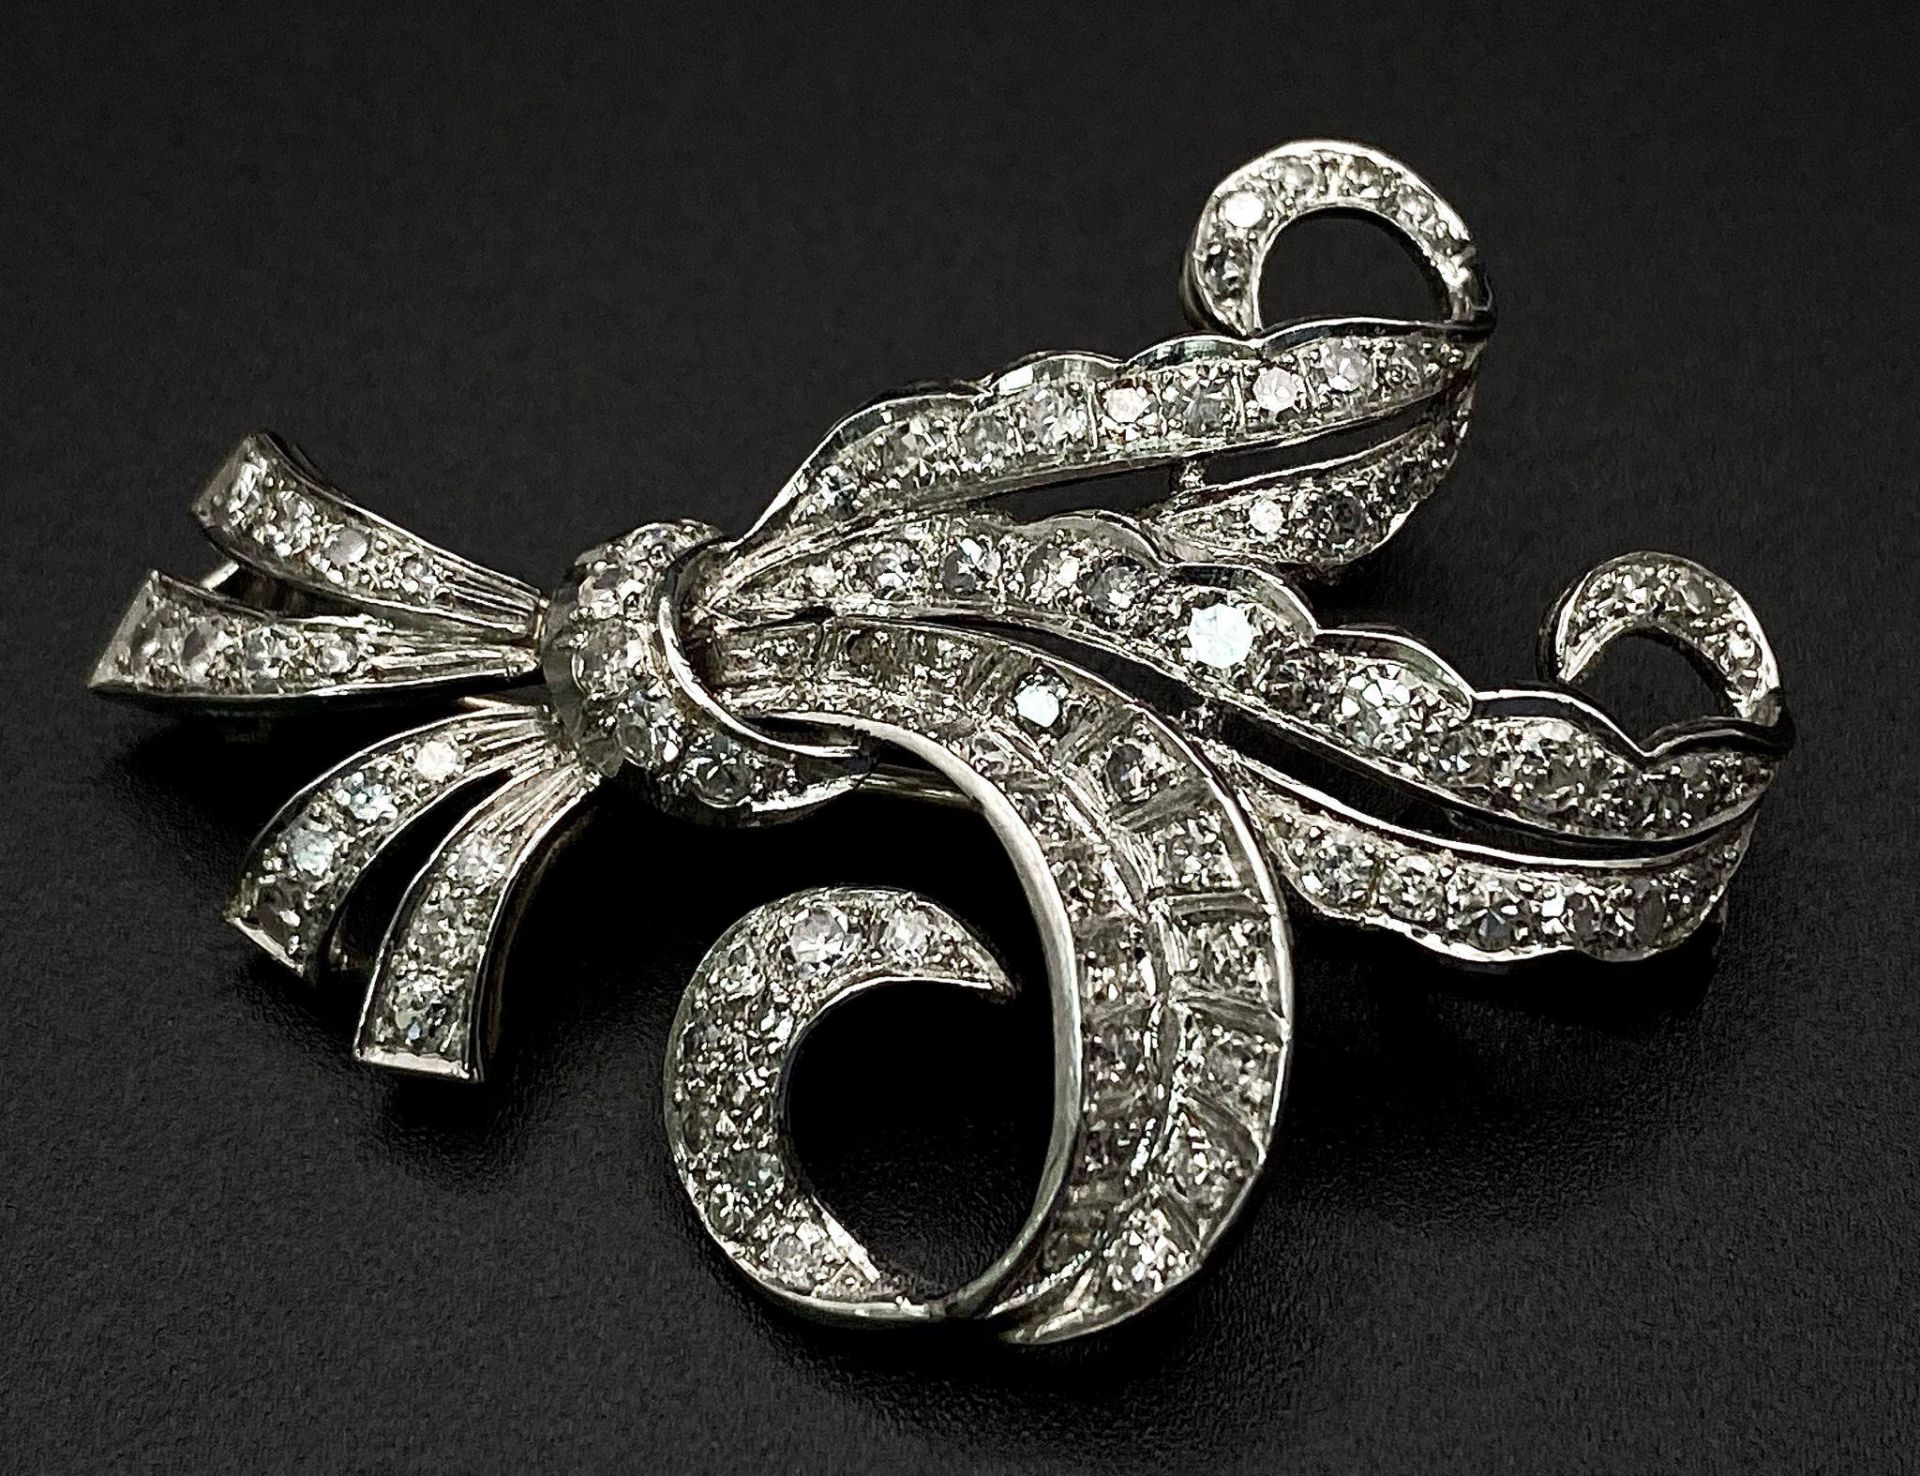 A Vintage Style Platinum and Diamond Elaborate Bow Brooch. 2.2ctw of encrusted diamonds. 10.7g total - Image 4 of 7